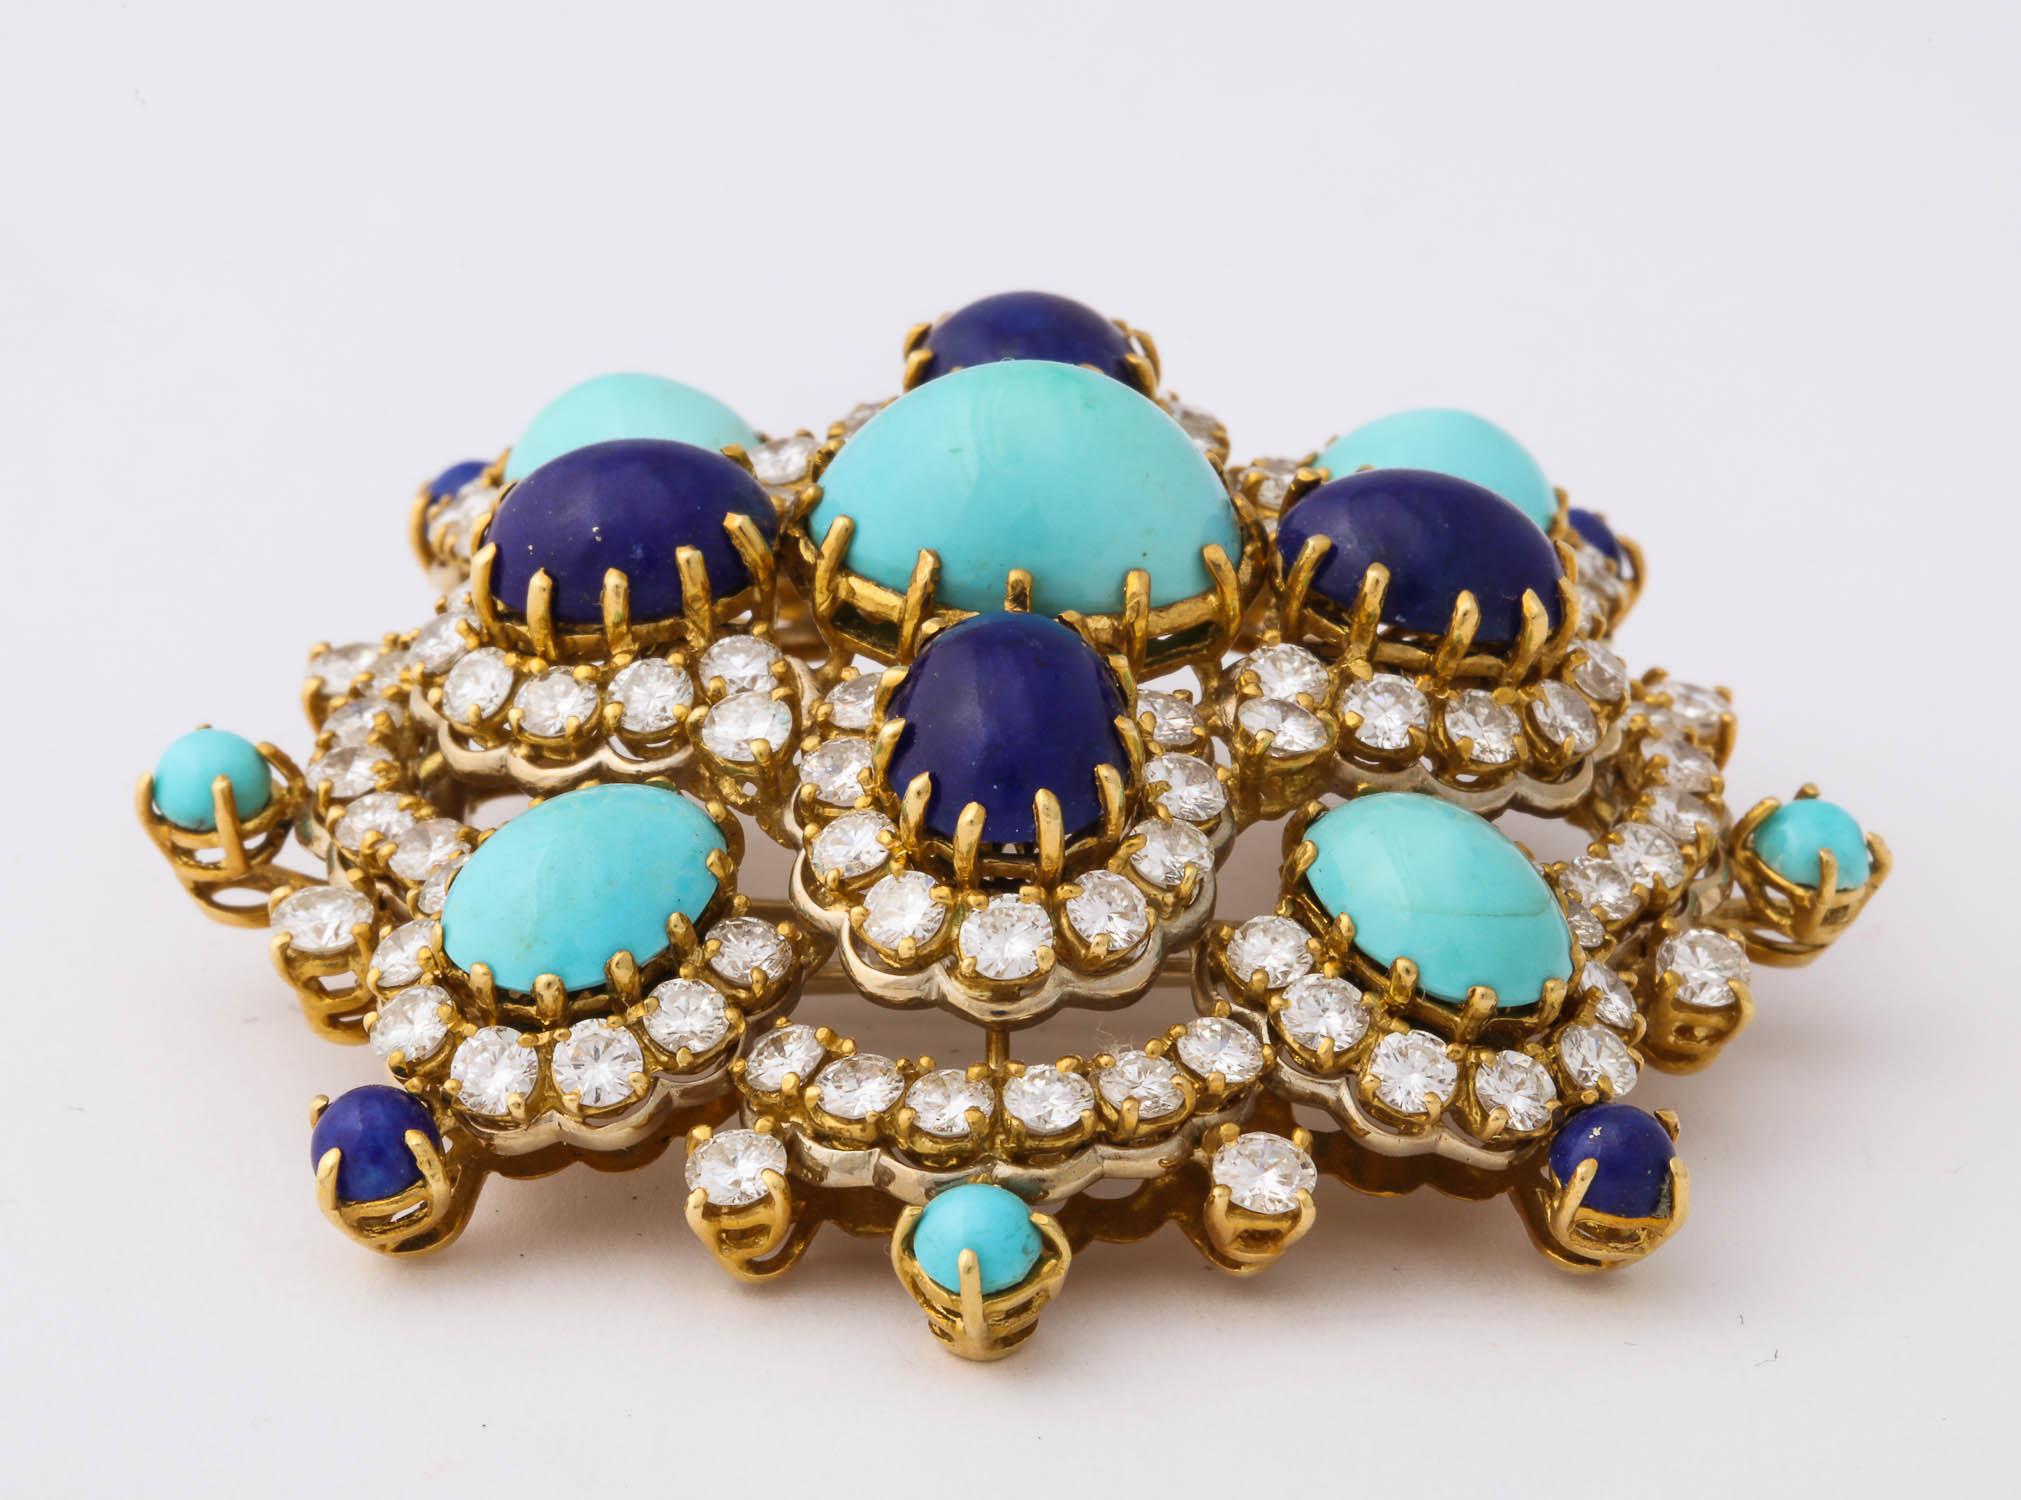 Oval Cut Turquoise, Lapis Lazuli, Diamond and Gold Brooch